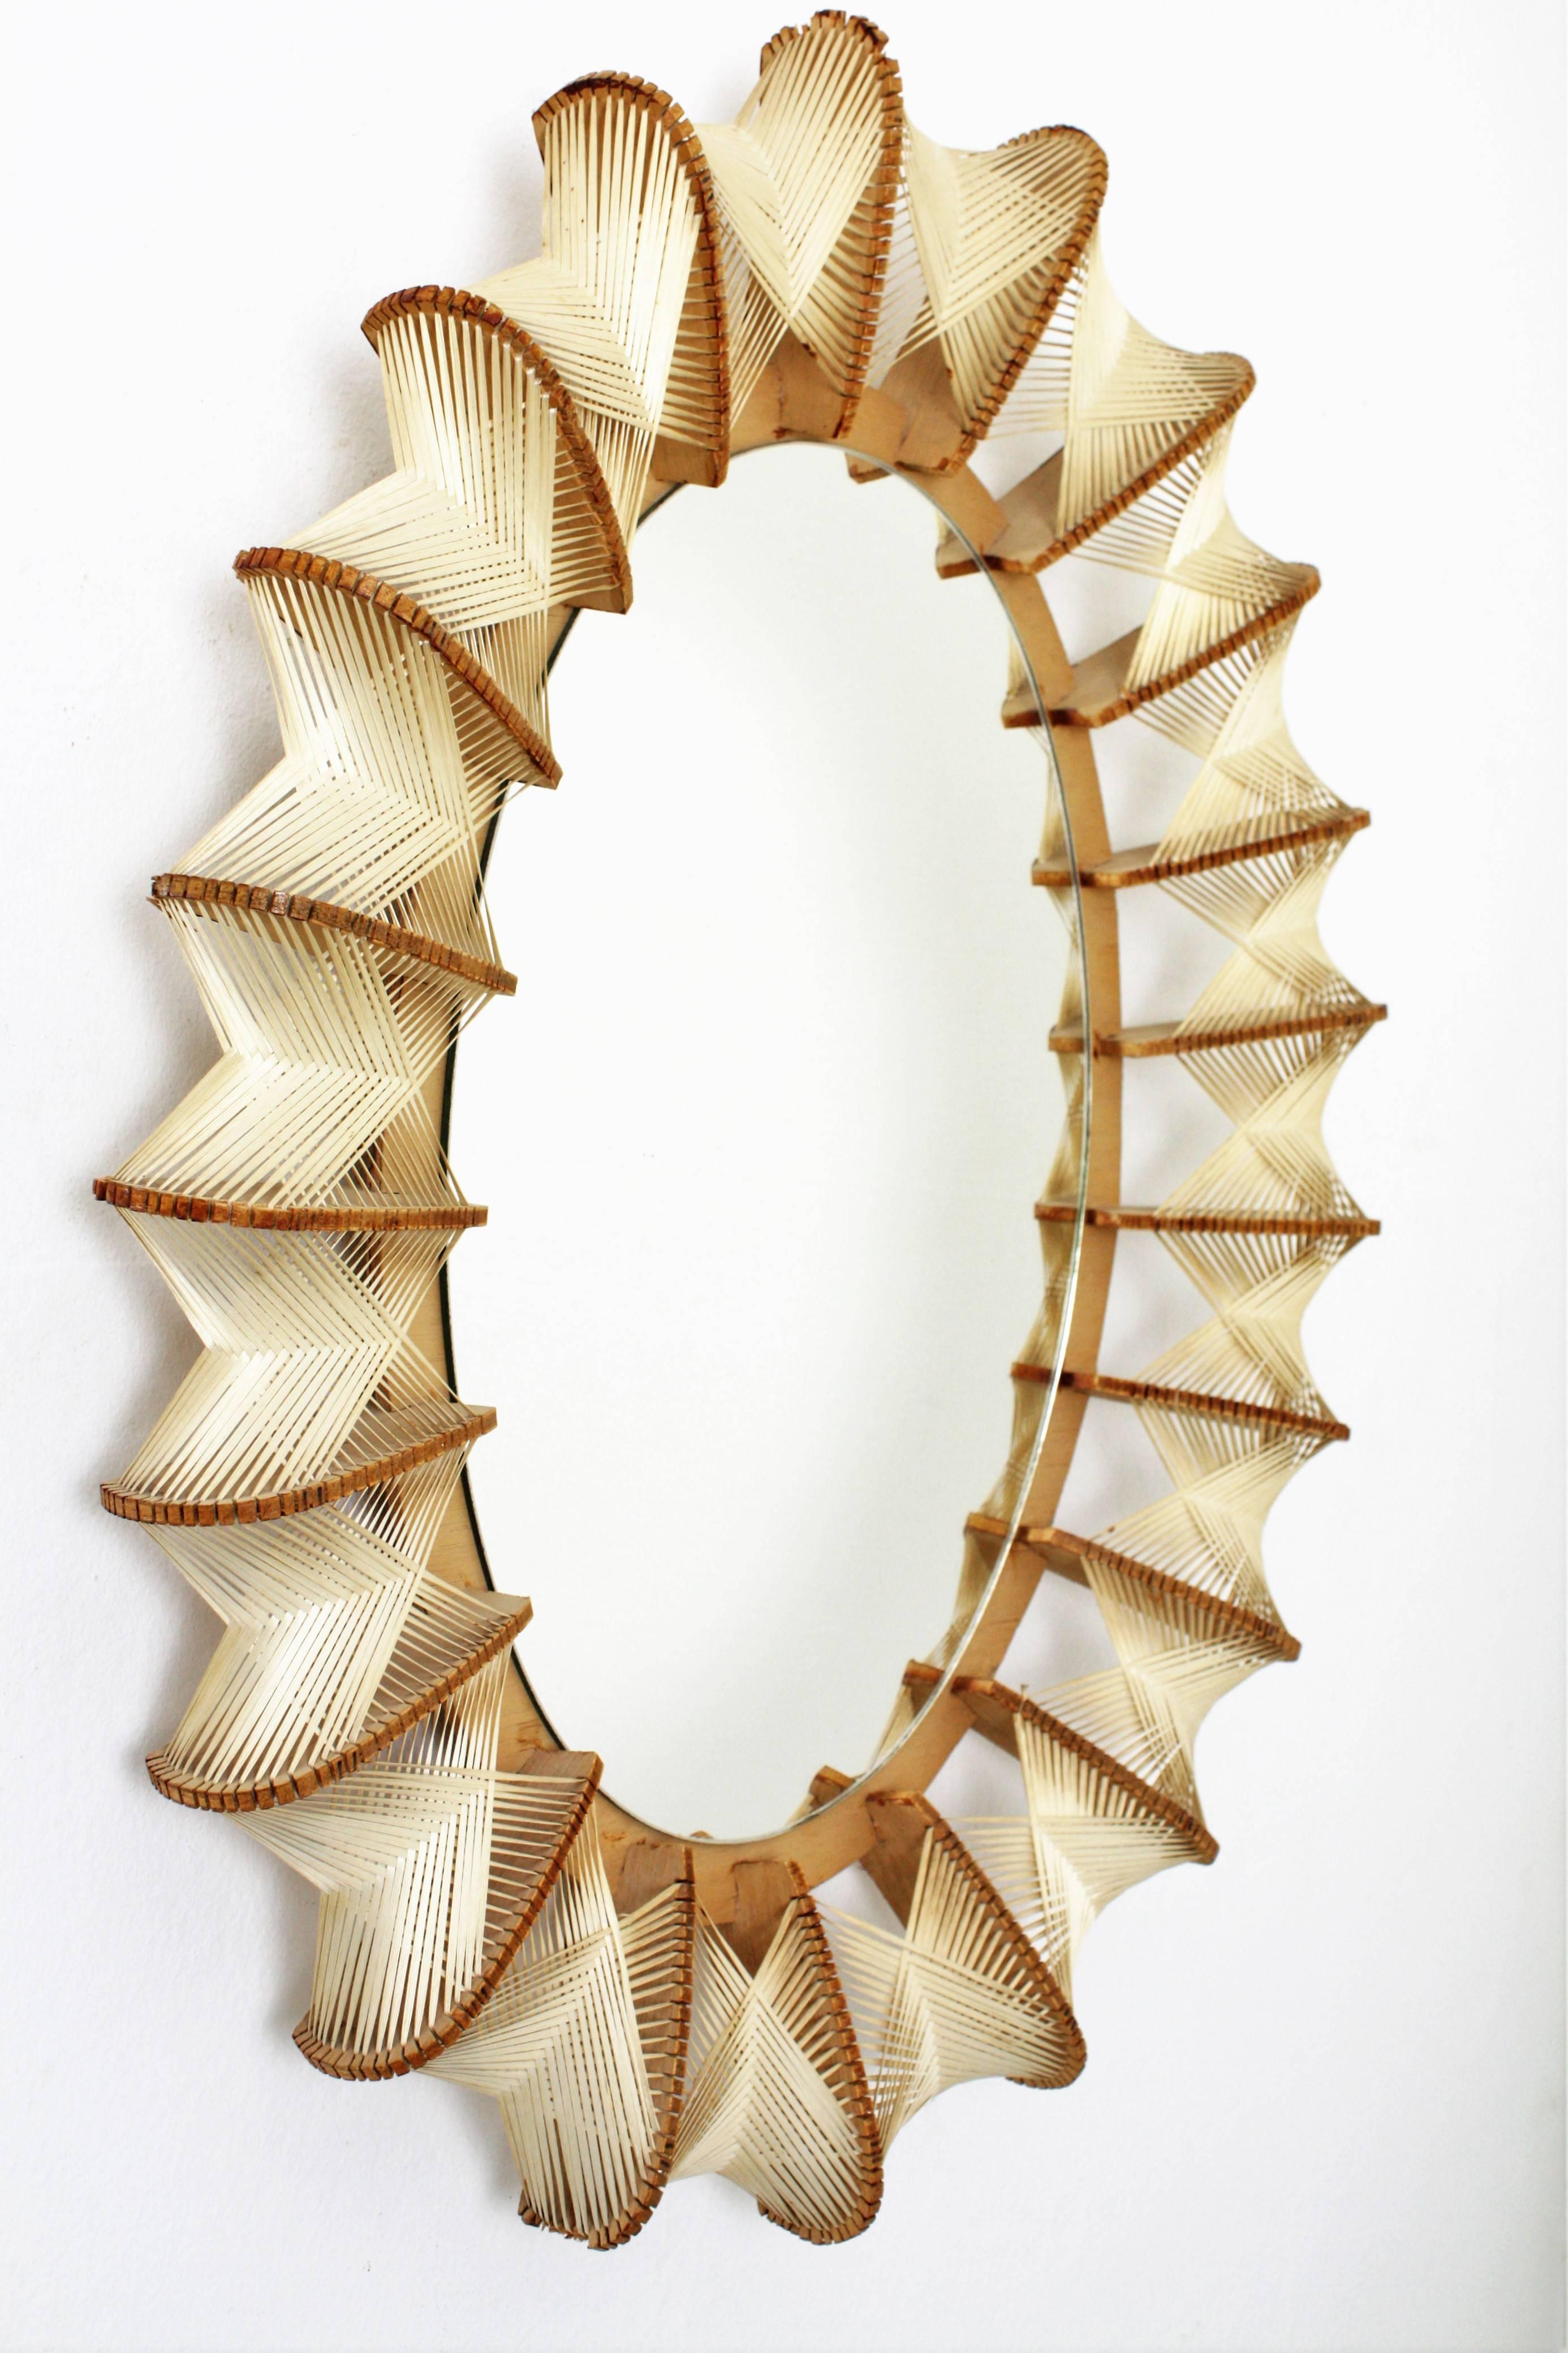 Mid-Century Modern oval mirror made with wood and hand woven wicker frame decoration that create a beautiful geometric design with Nordic style accents.
France, 1960s.

Avaliable a huge collection of rattan, bamboo and wicker mirrors. Please kindly